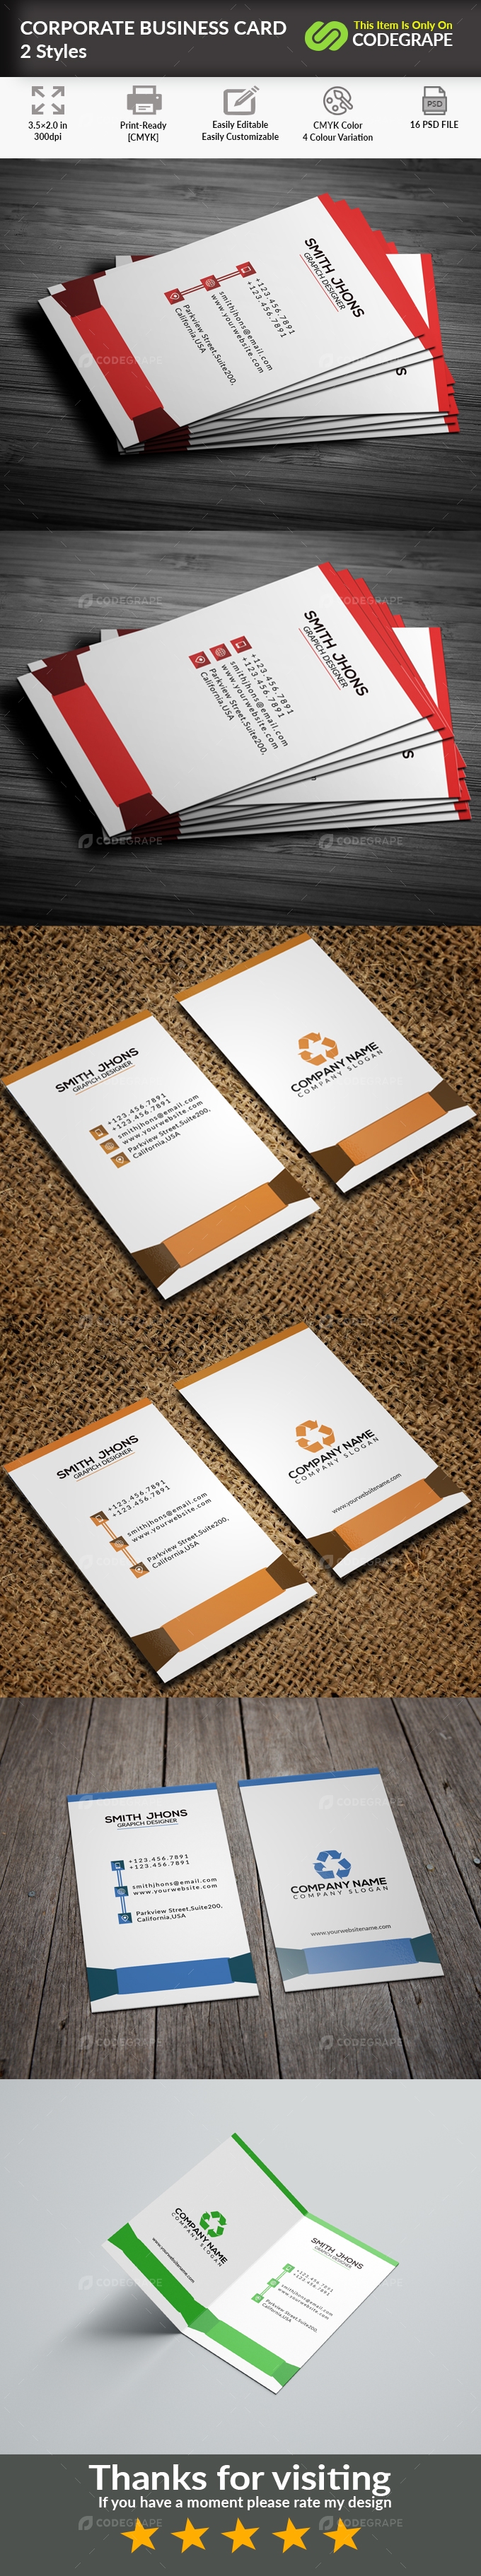 Corporate Business Card 2 Styles